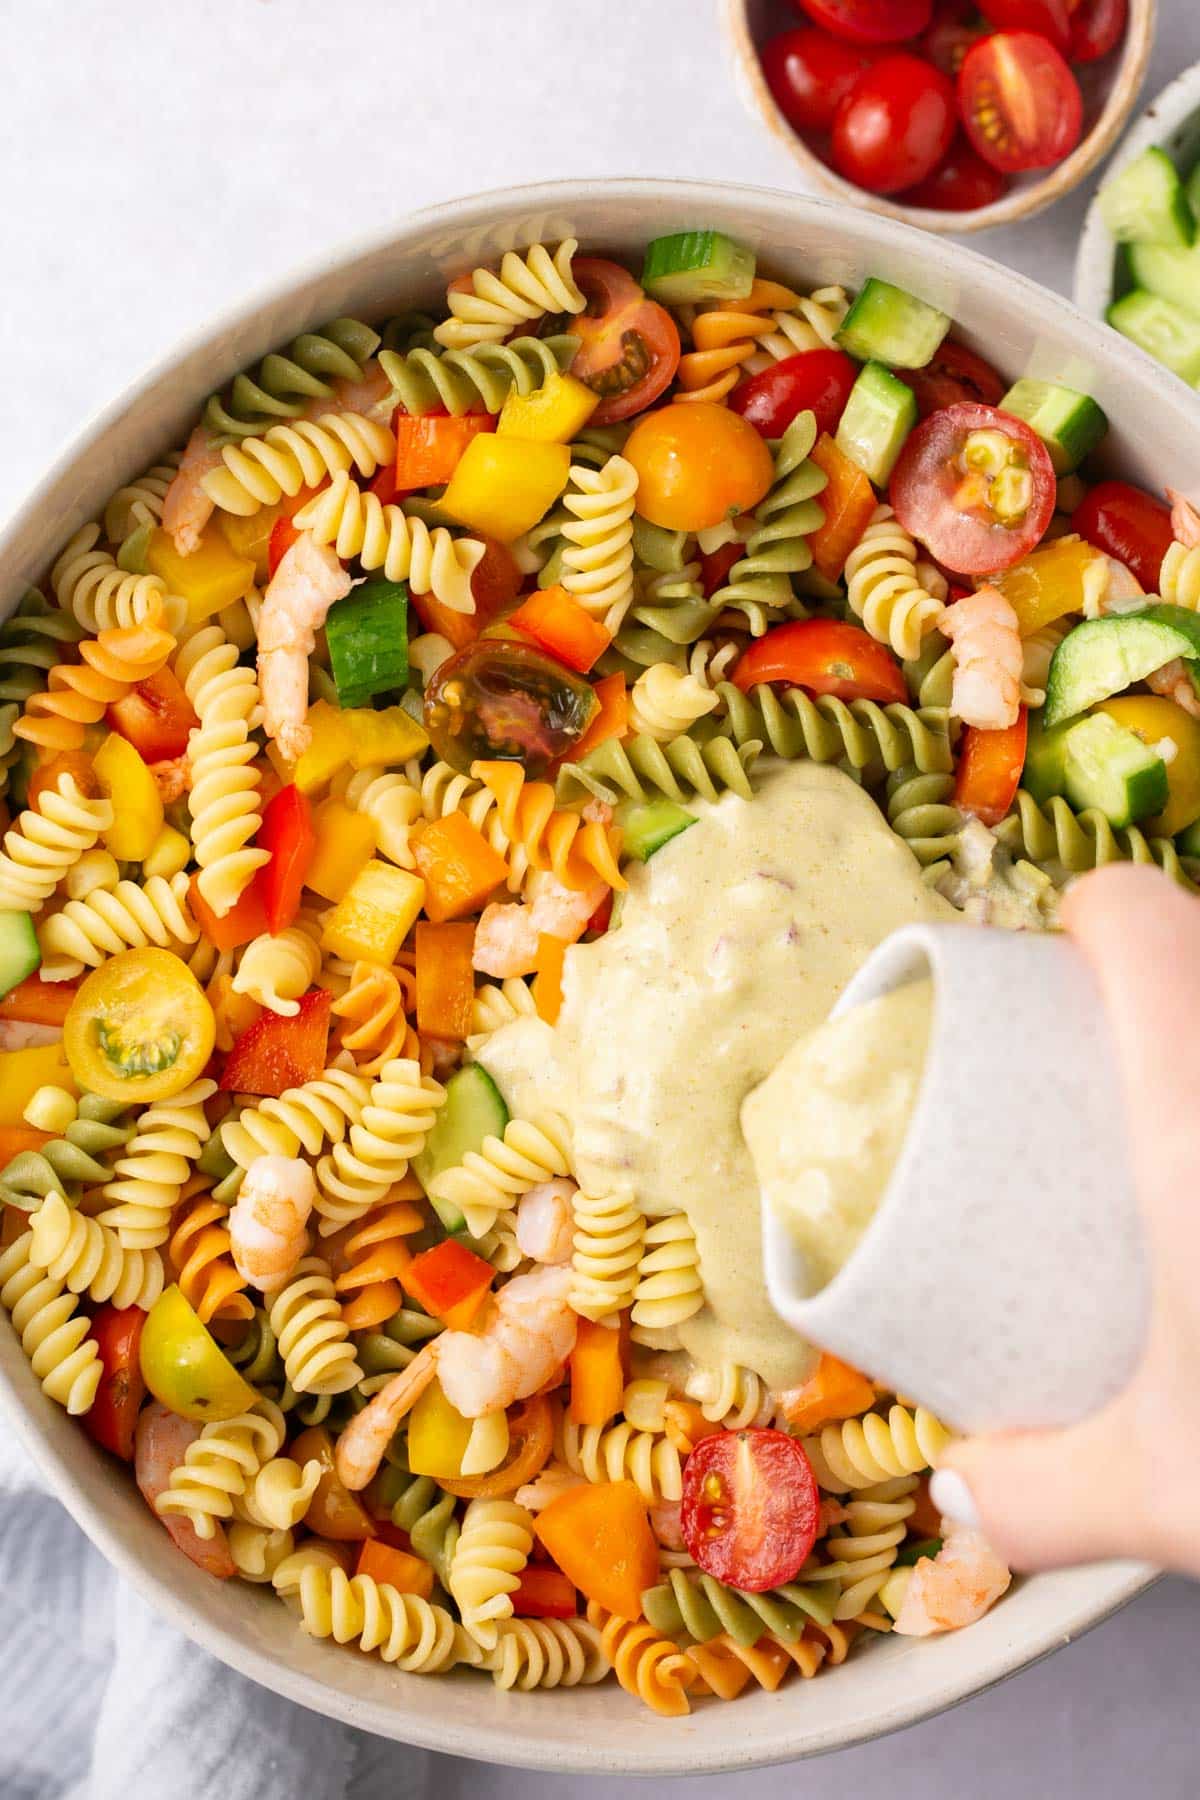 Pouring dressing over pasta salad.